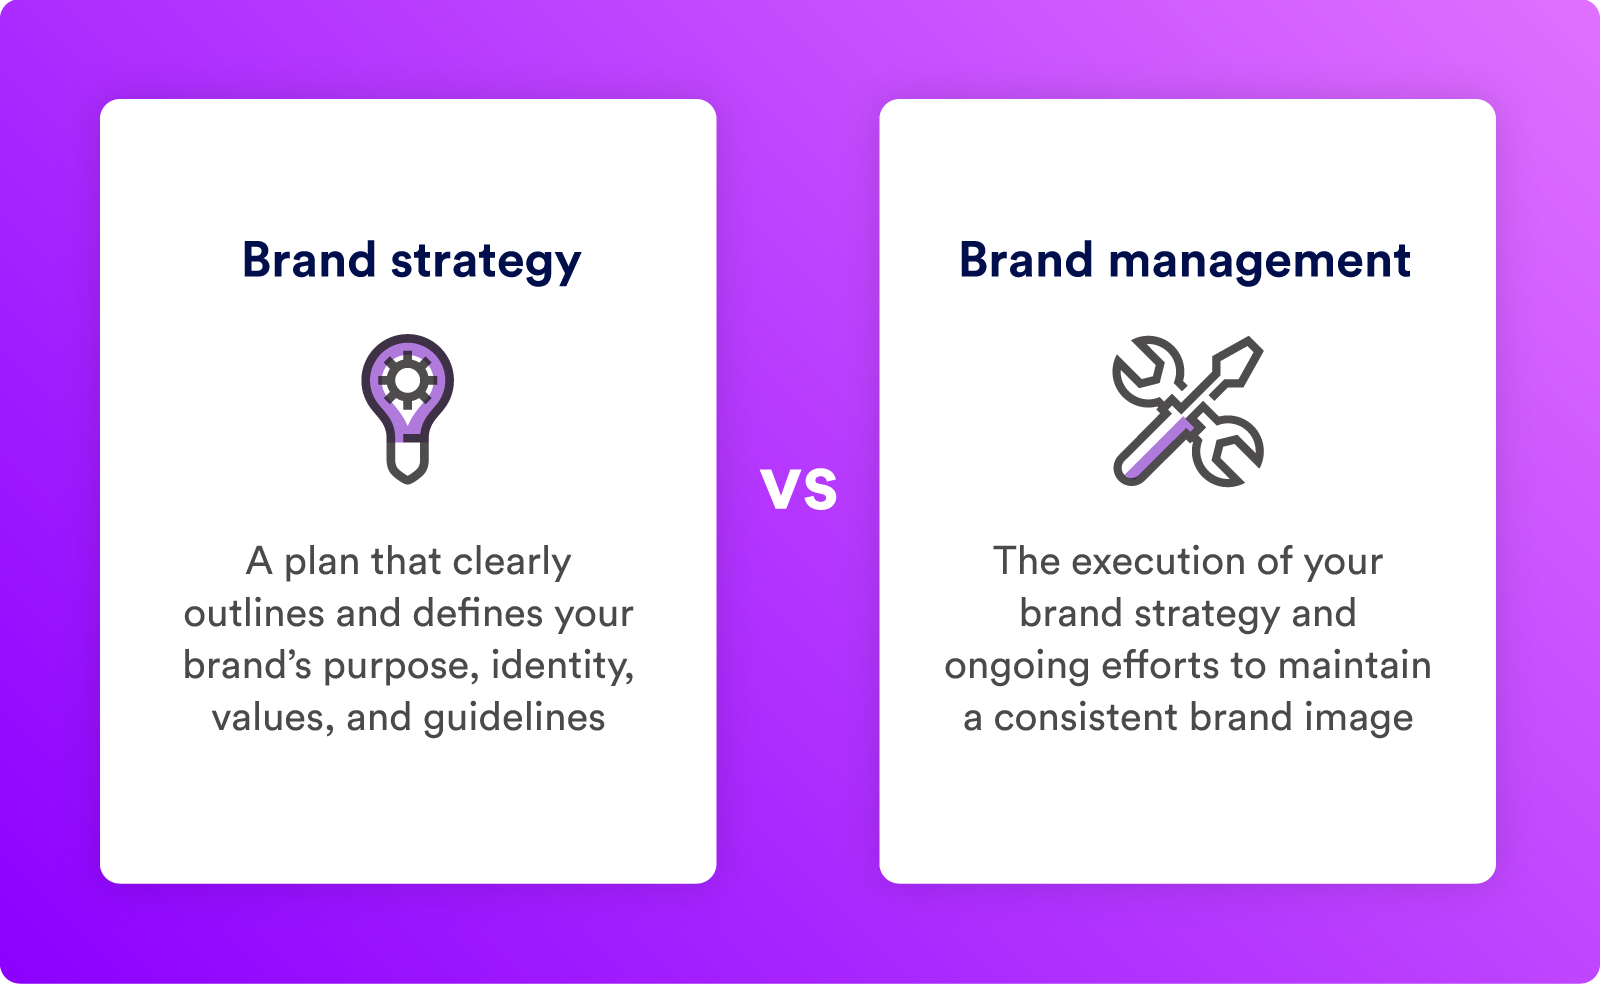 The difference between strategic brand management and a brand strategy.